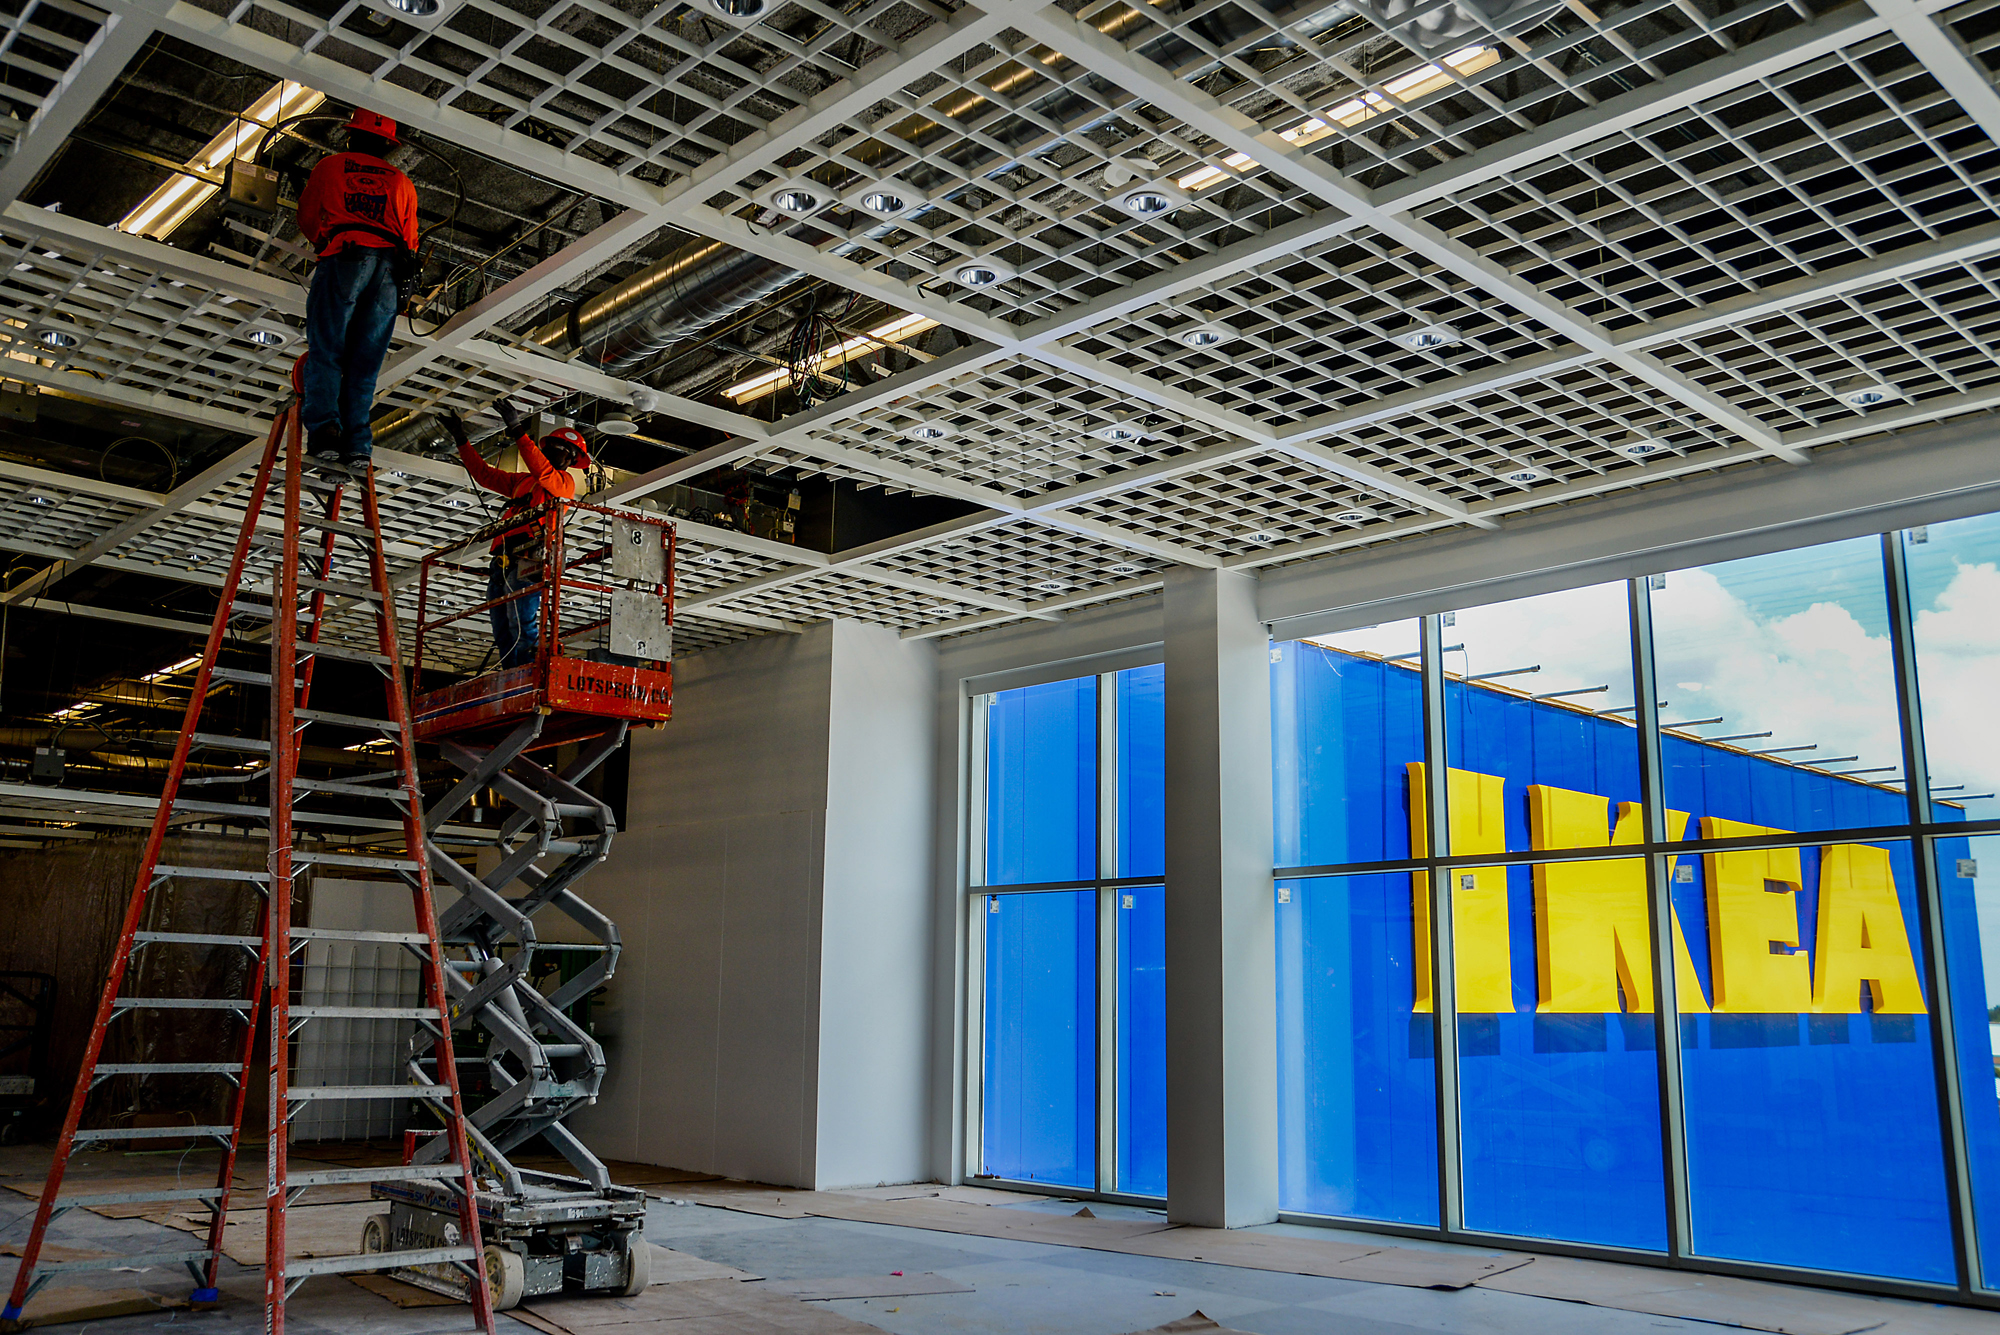 Contractors work on construction of a new IKEA store in Miami, May 20, 2014. (Christina Mendenhall—Bloomberg/Getty Images)